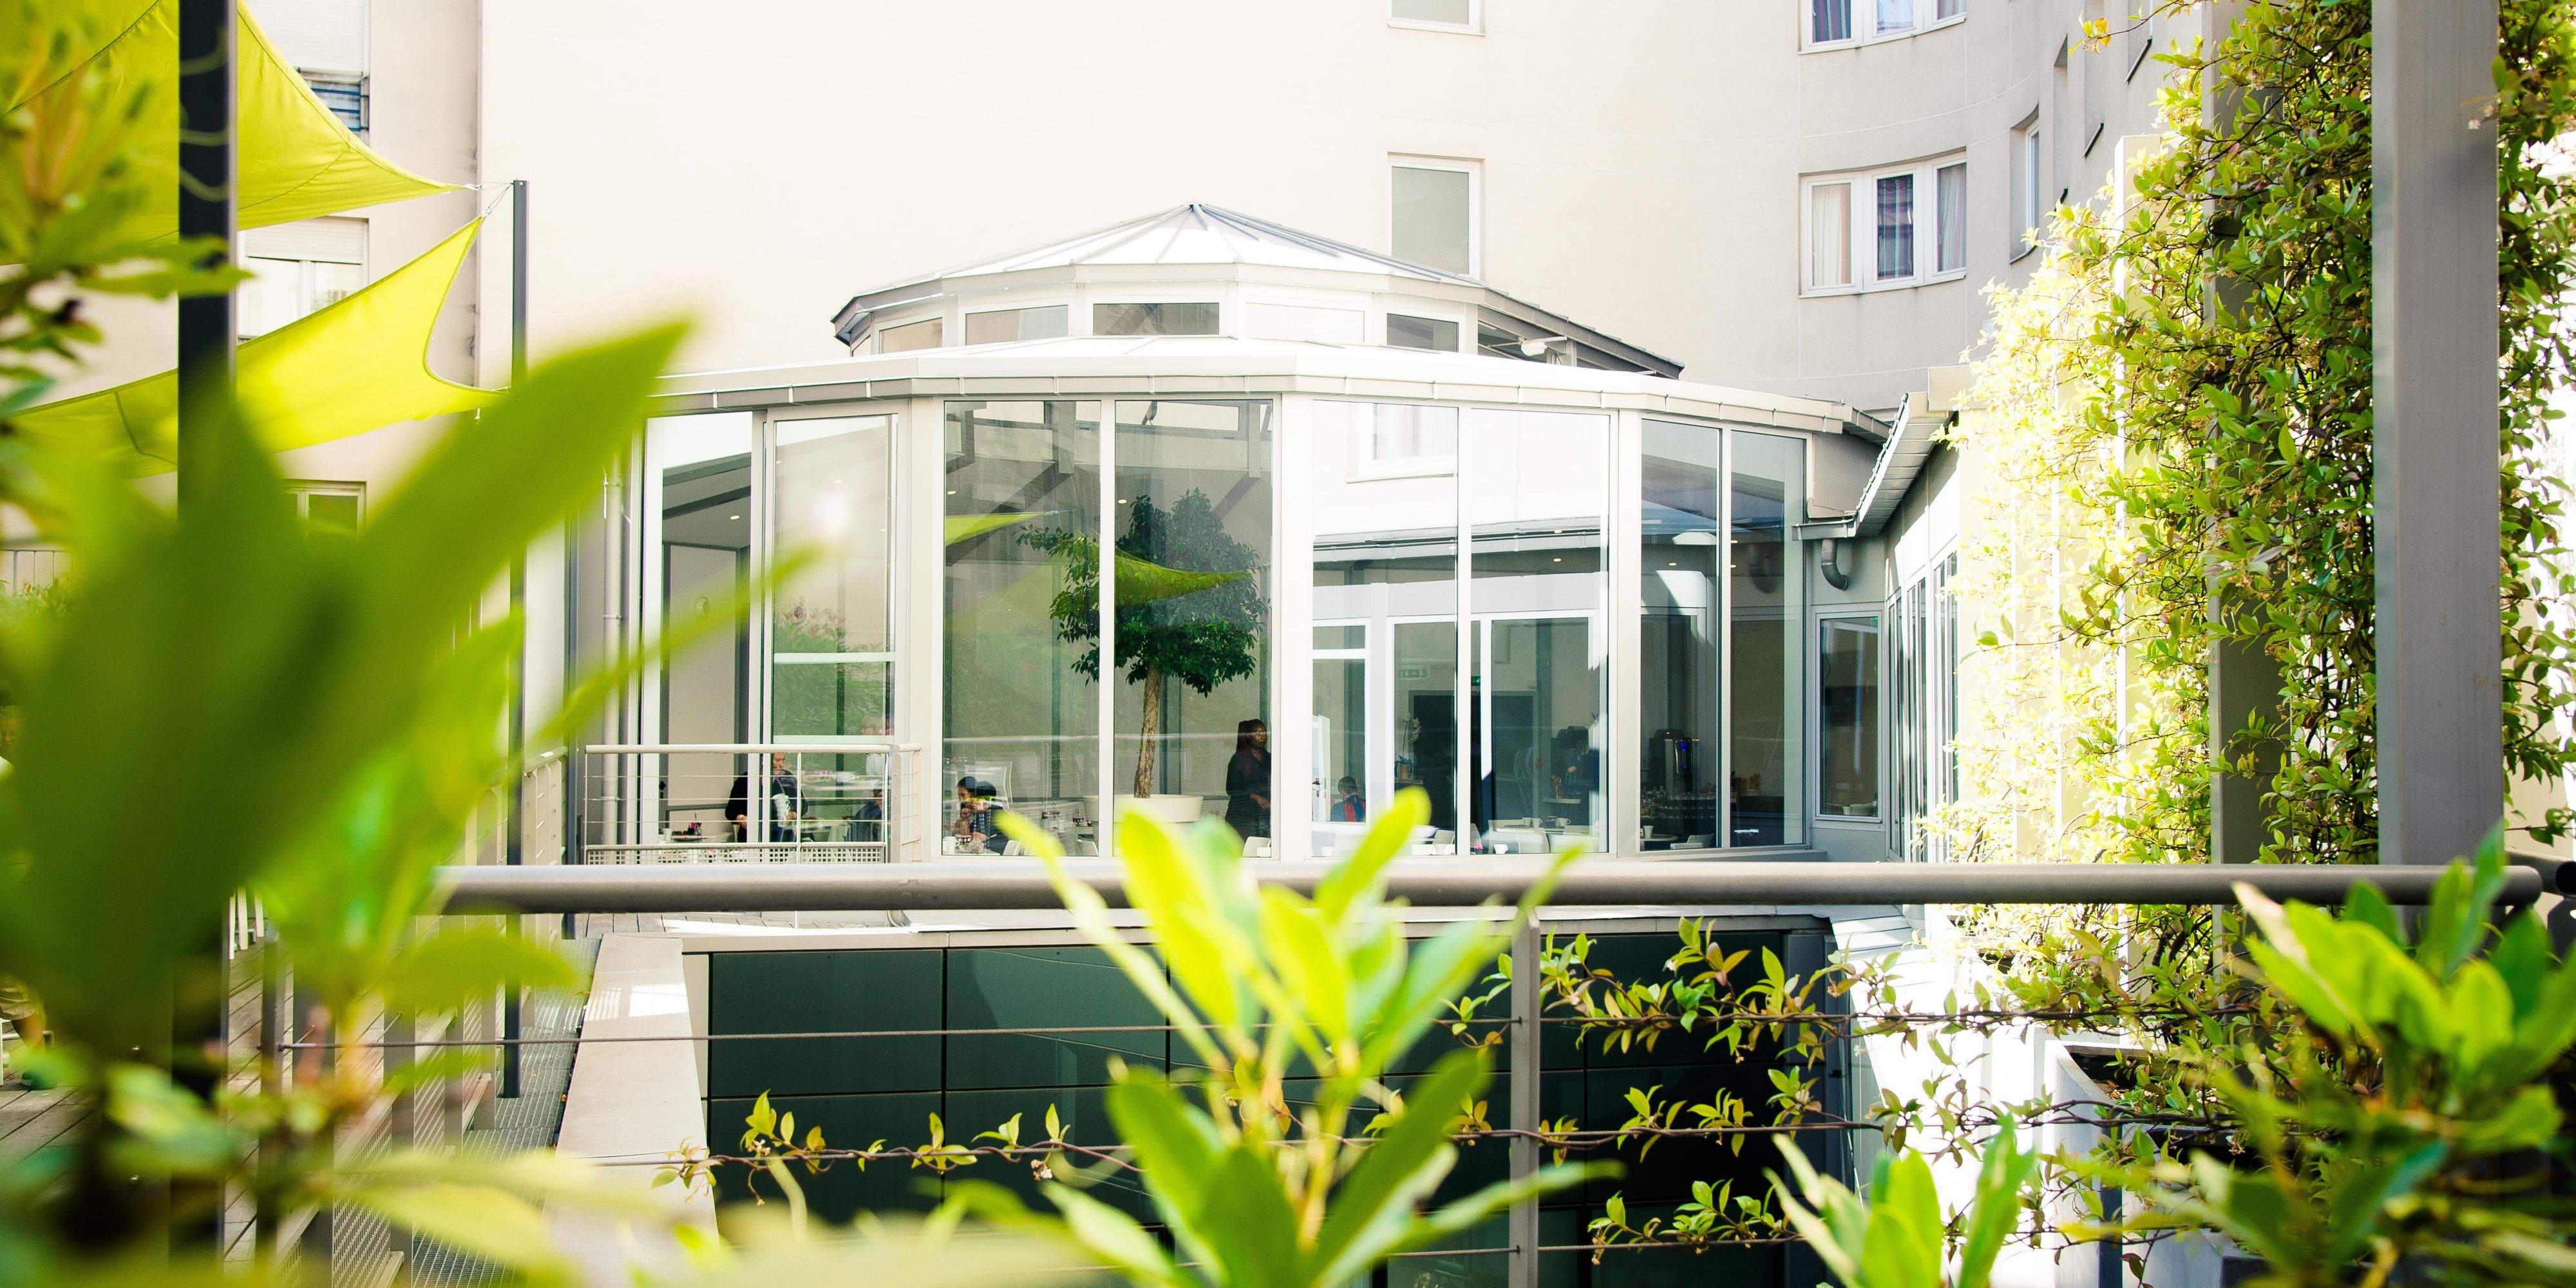 Wasabi, our conservatory of 140sqm, is a small pieve of heaven in the middle of our hotel and offers a peaceful terrace of 120sqm. You will be able to appreciate a unique and unforgettable moment full of surprises.